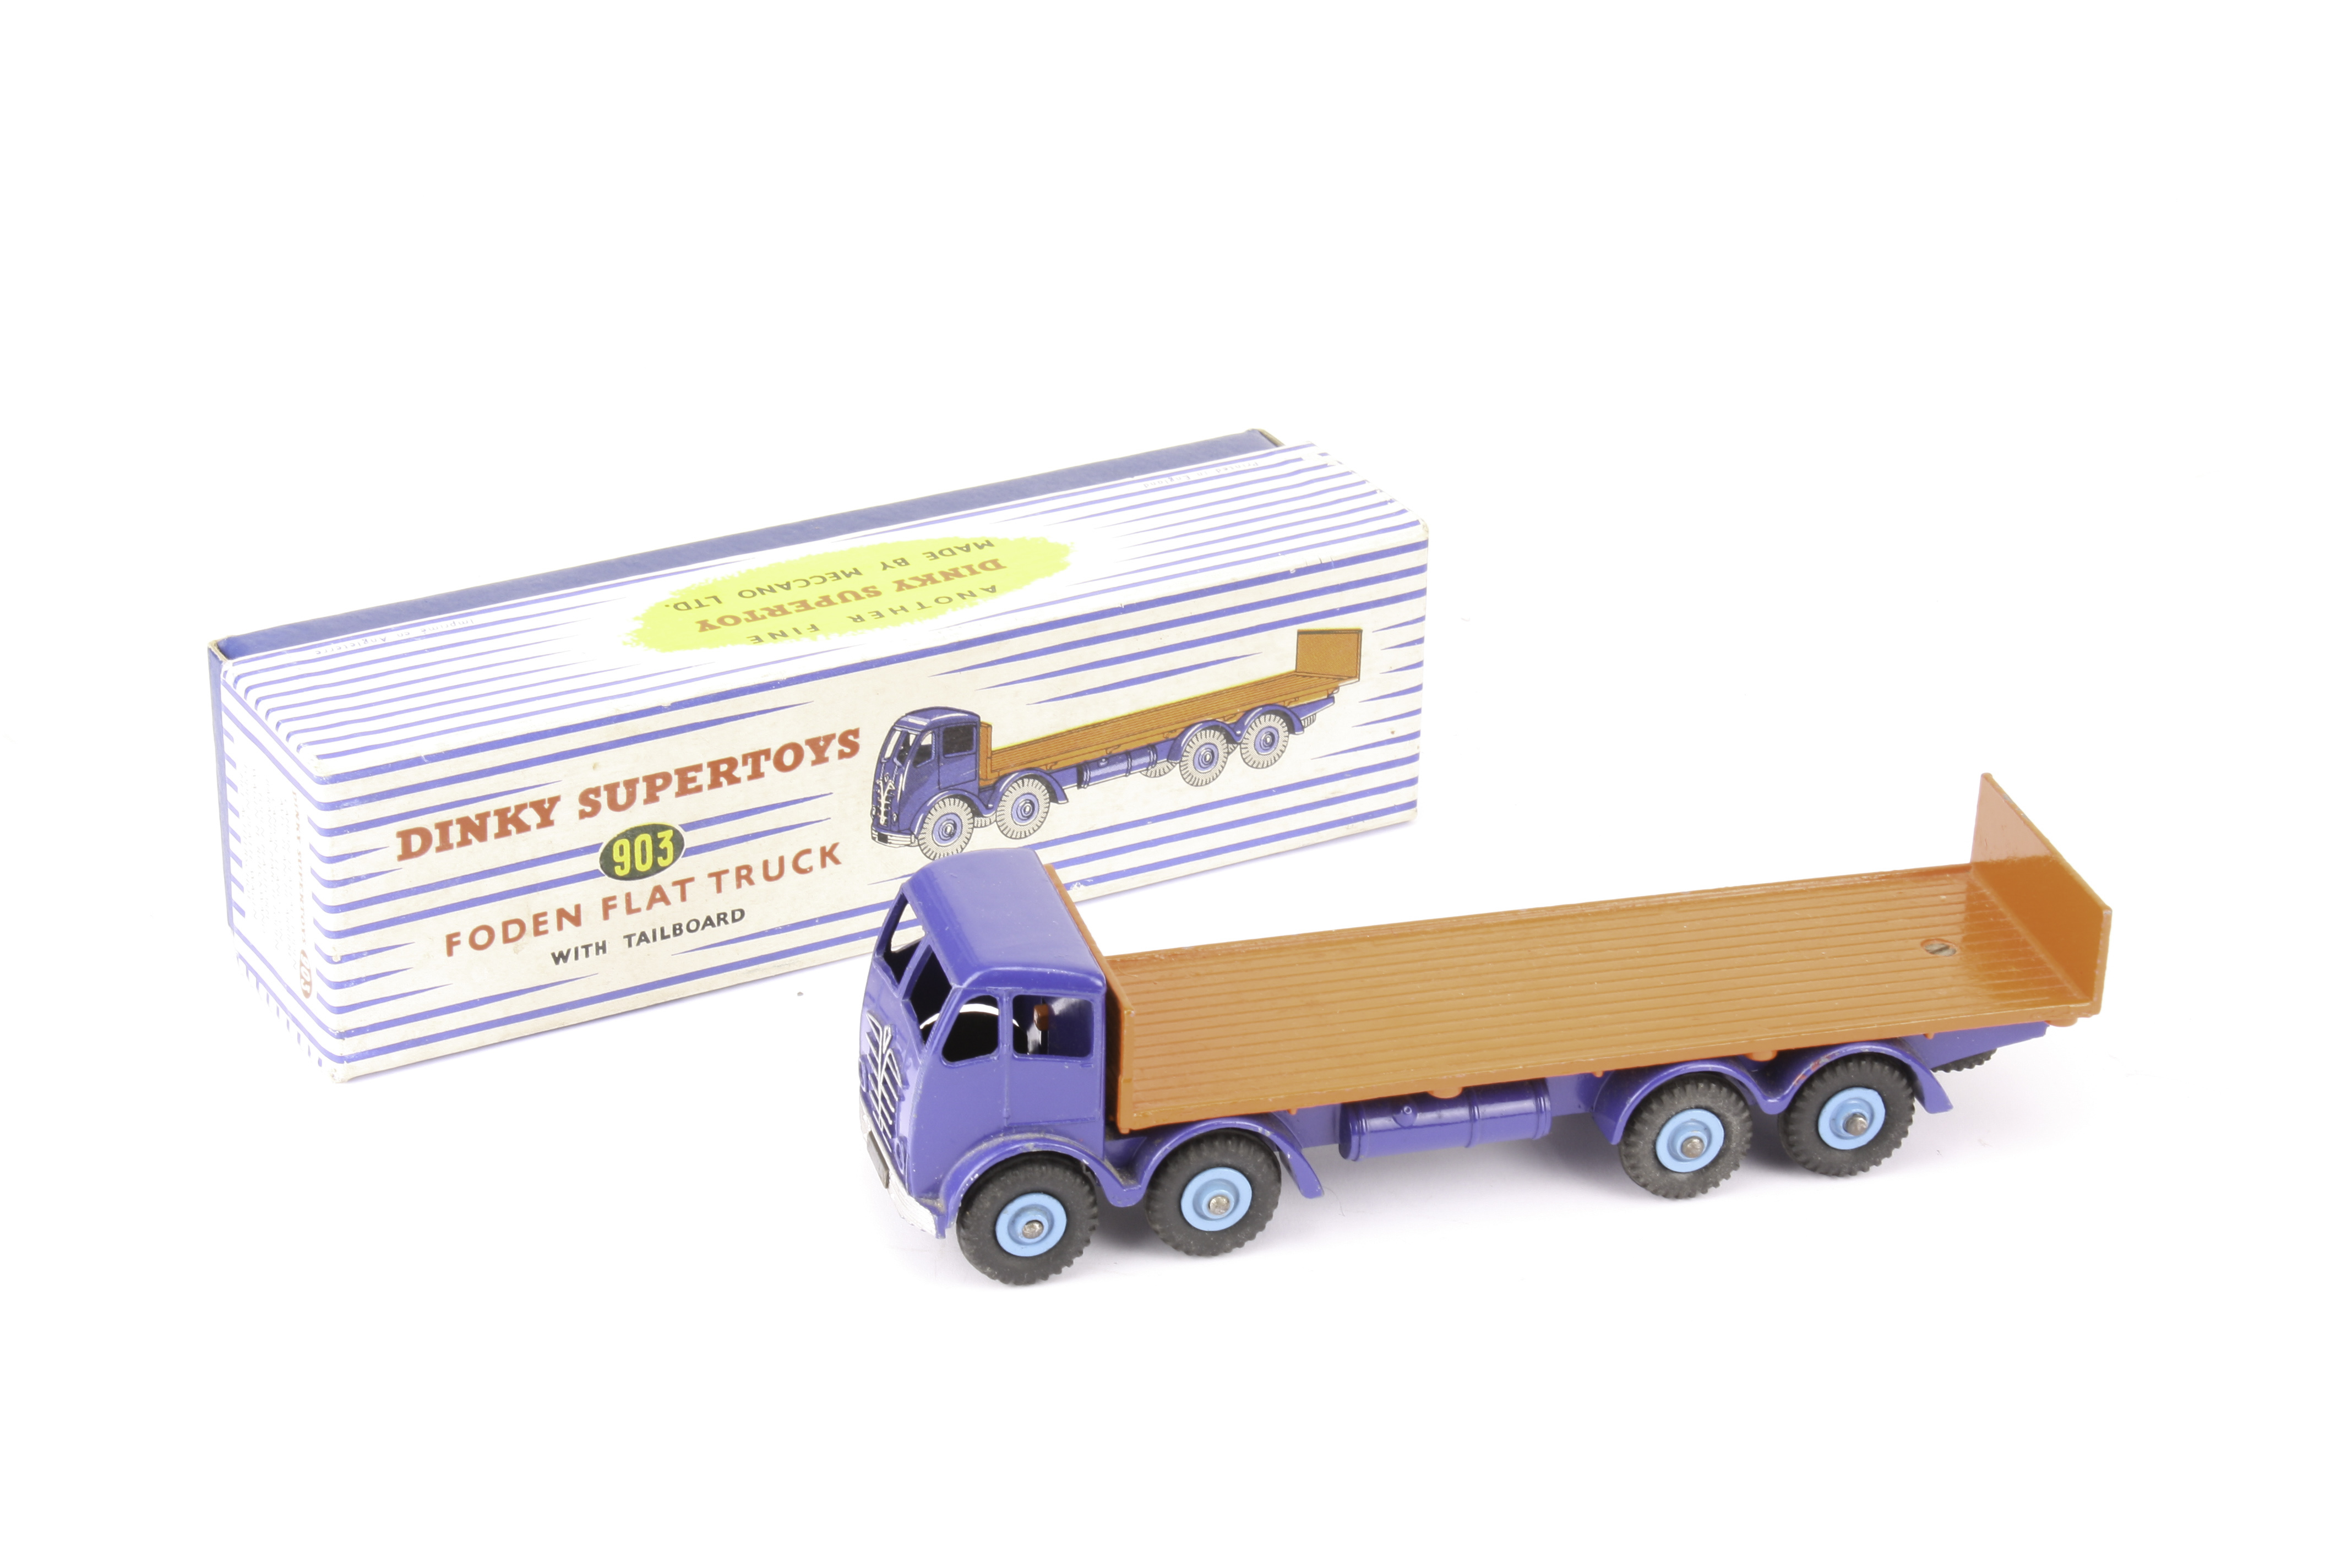 A Dinky Toys 503 Foden Flat Truck with Tailboard, with royal blue cab and chassis, orange back and